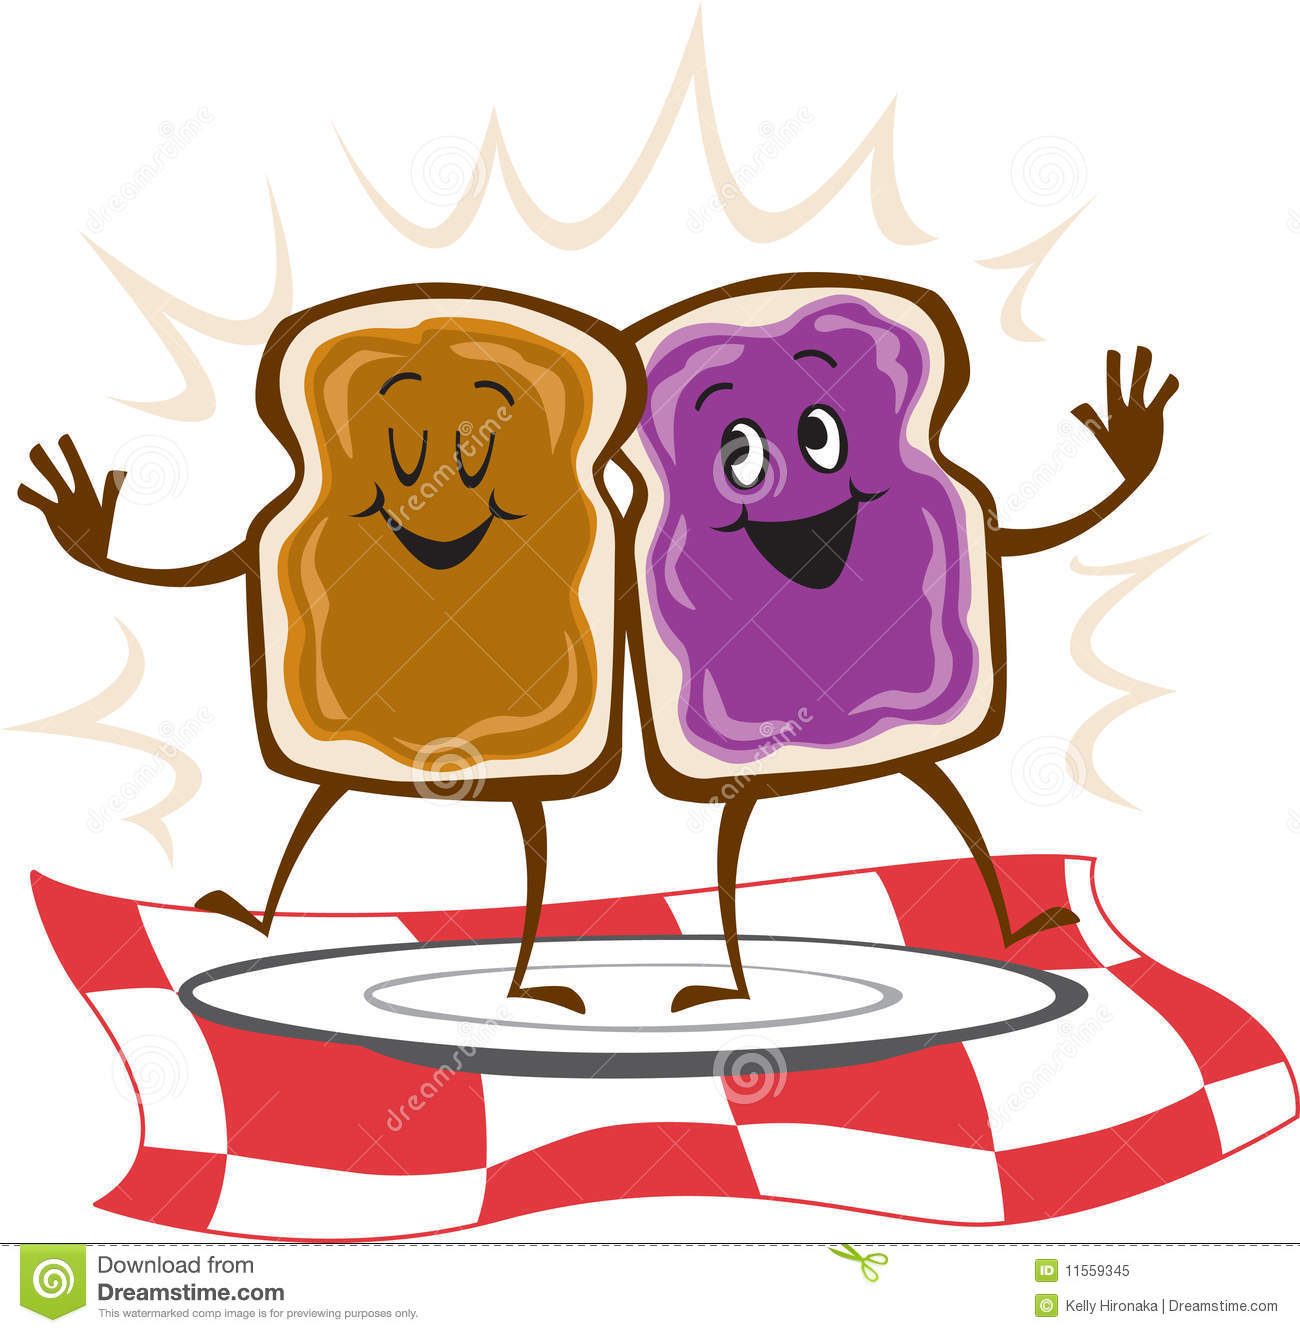 powerhouse clipart u0026middo - Peanut Butter And Jelly Clipart